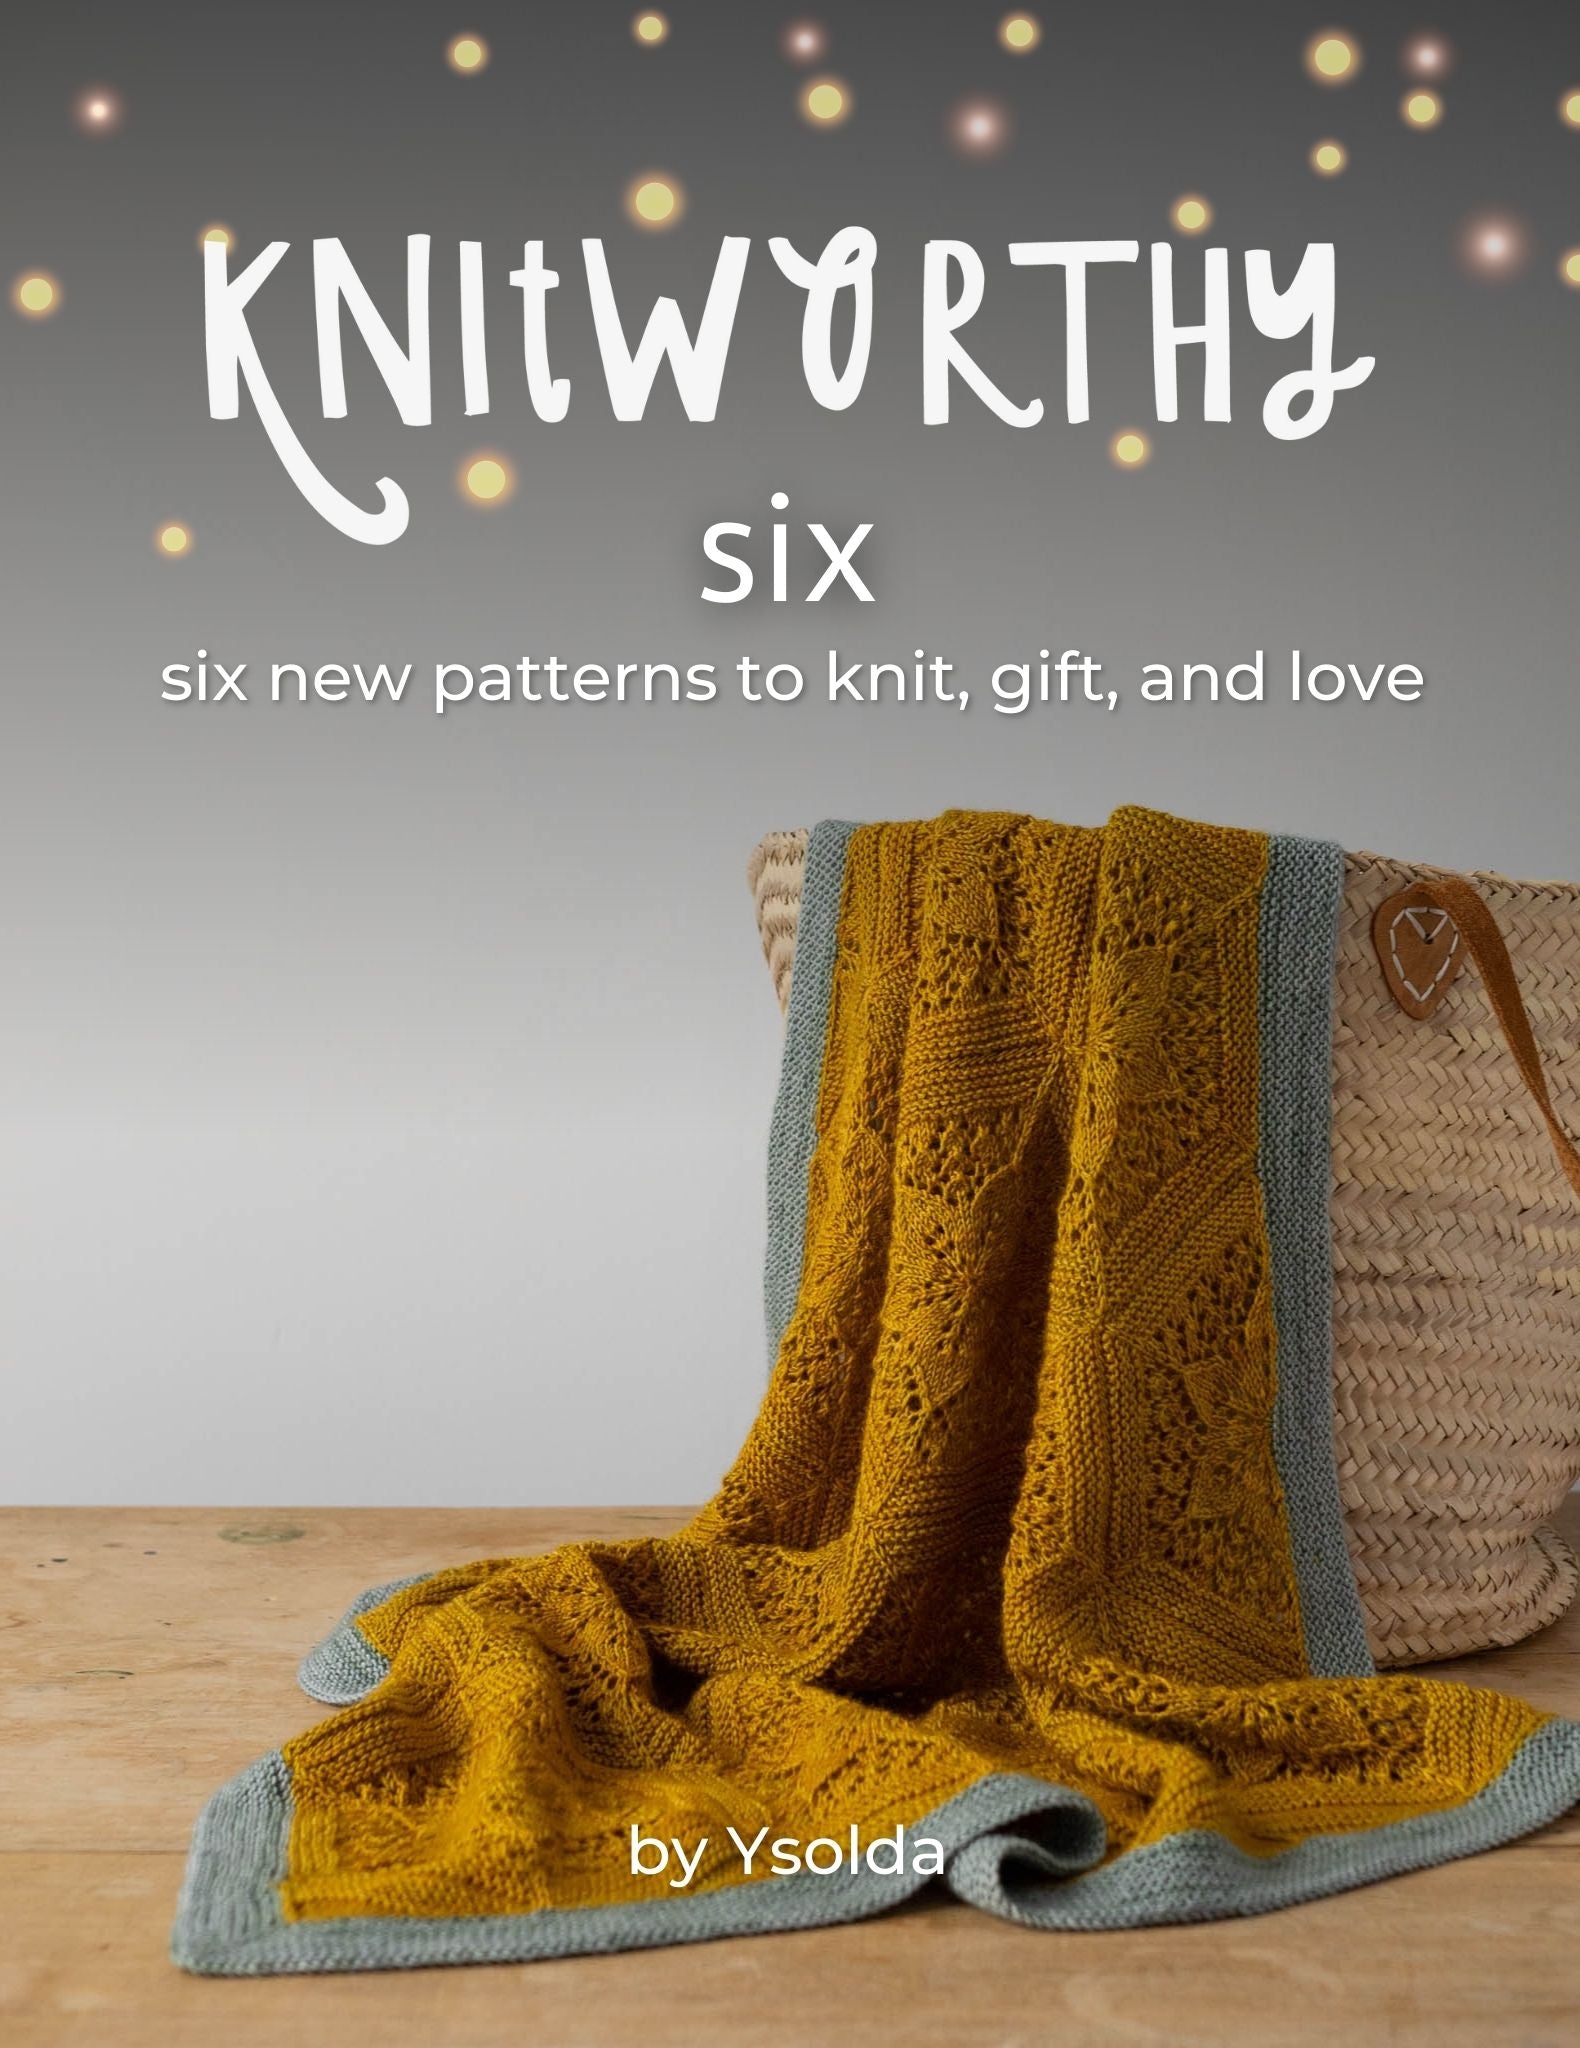 Knitwork Courses and Clubs